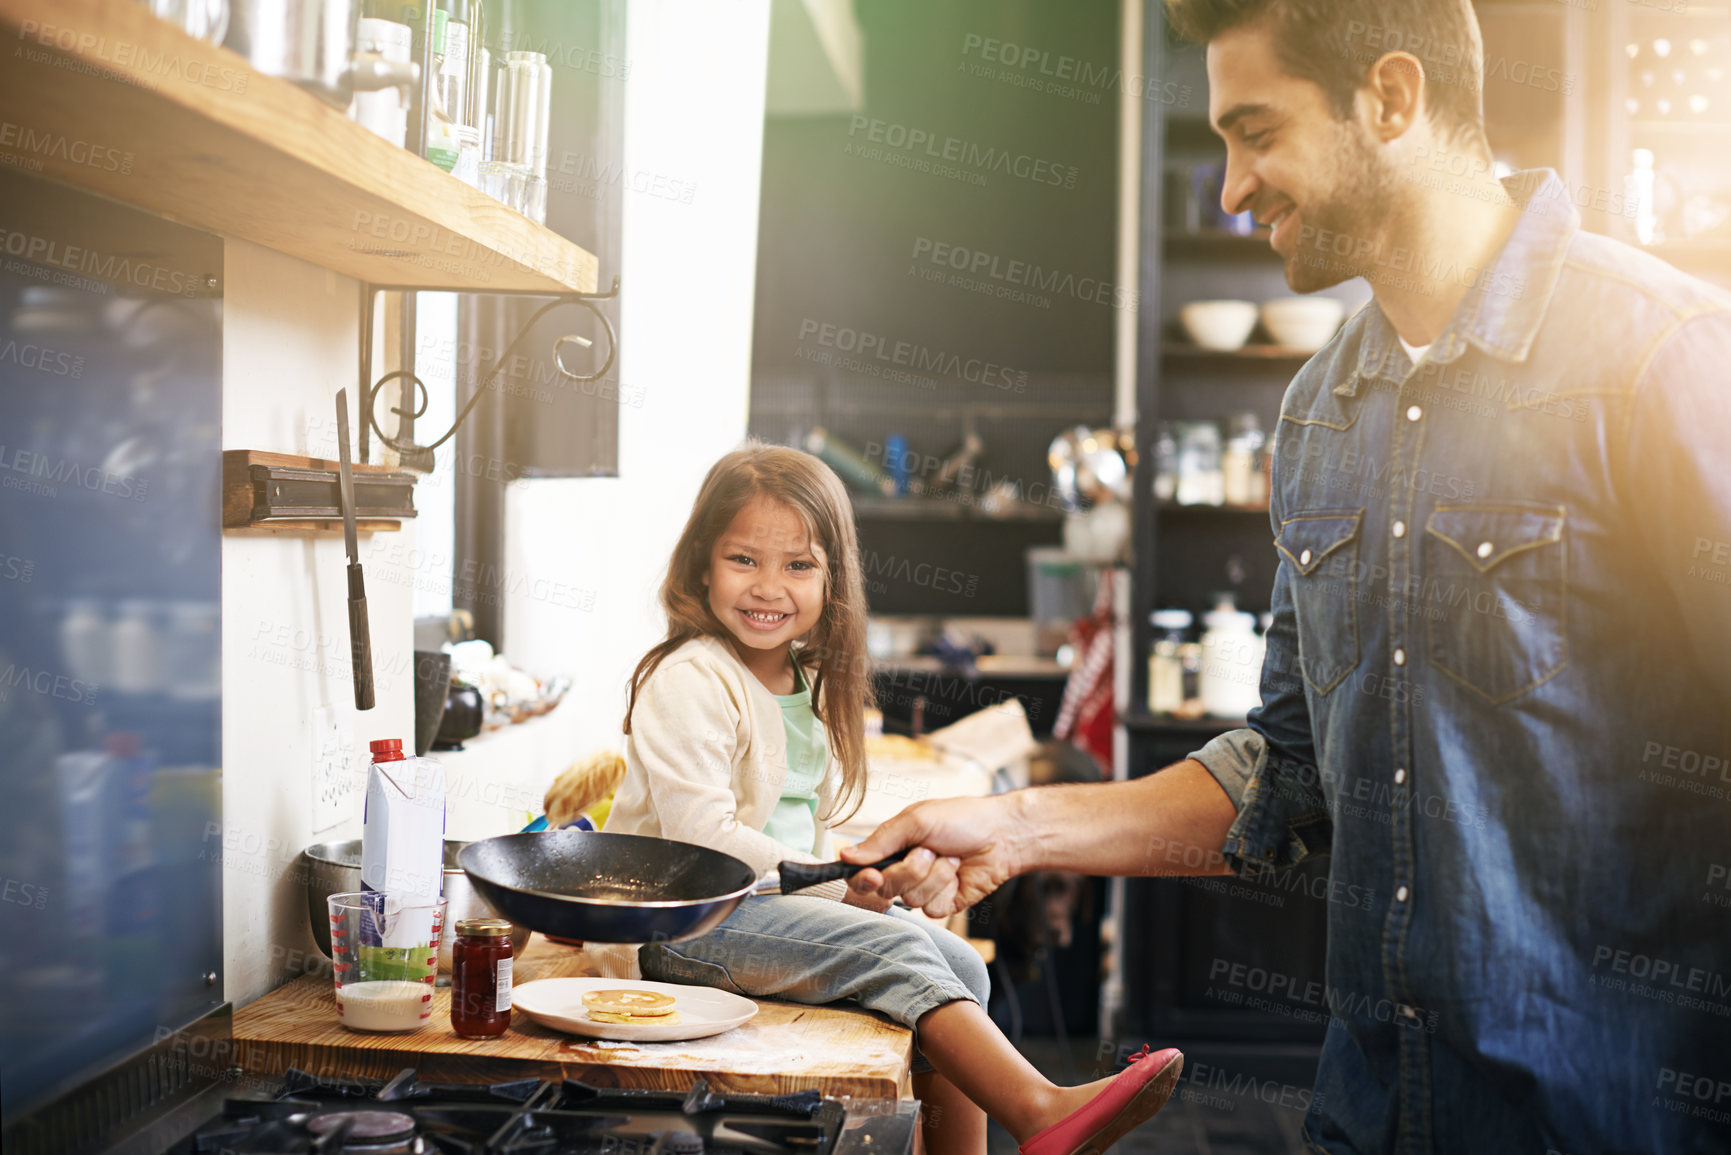 Buy stock photo Shot of a father and daughter making pancakes together